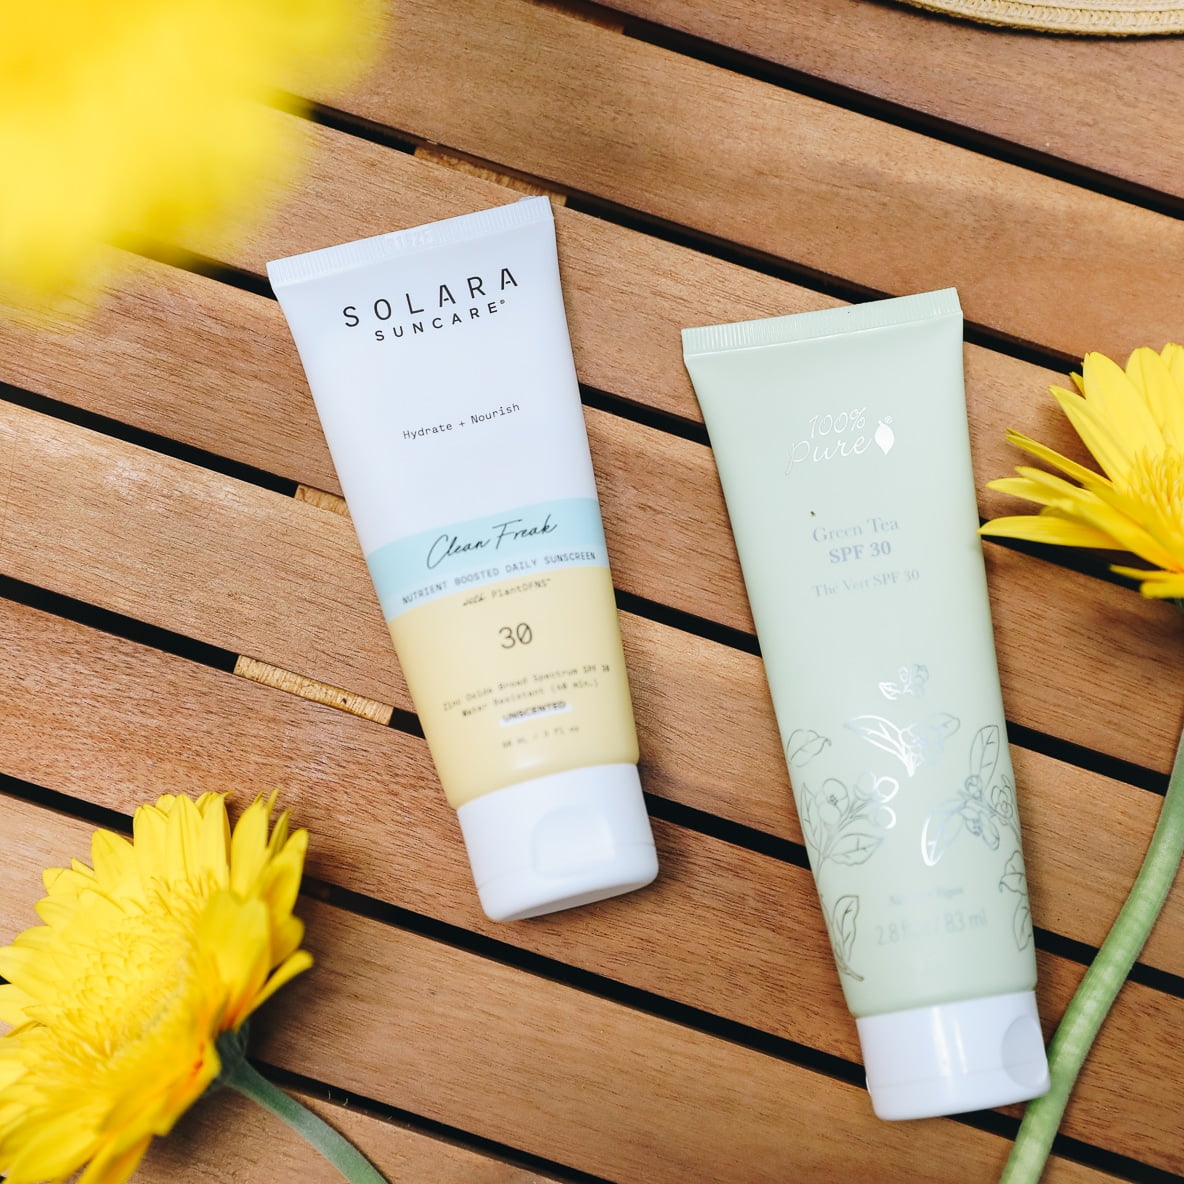 The Best Mineral Sunscreen [For Your Body] - The Healthy Maven